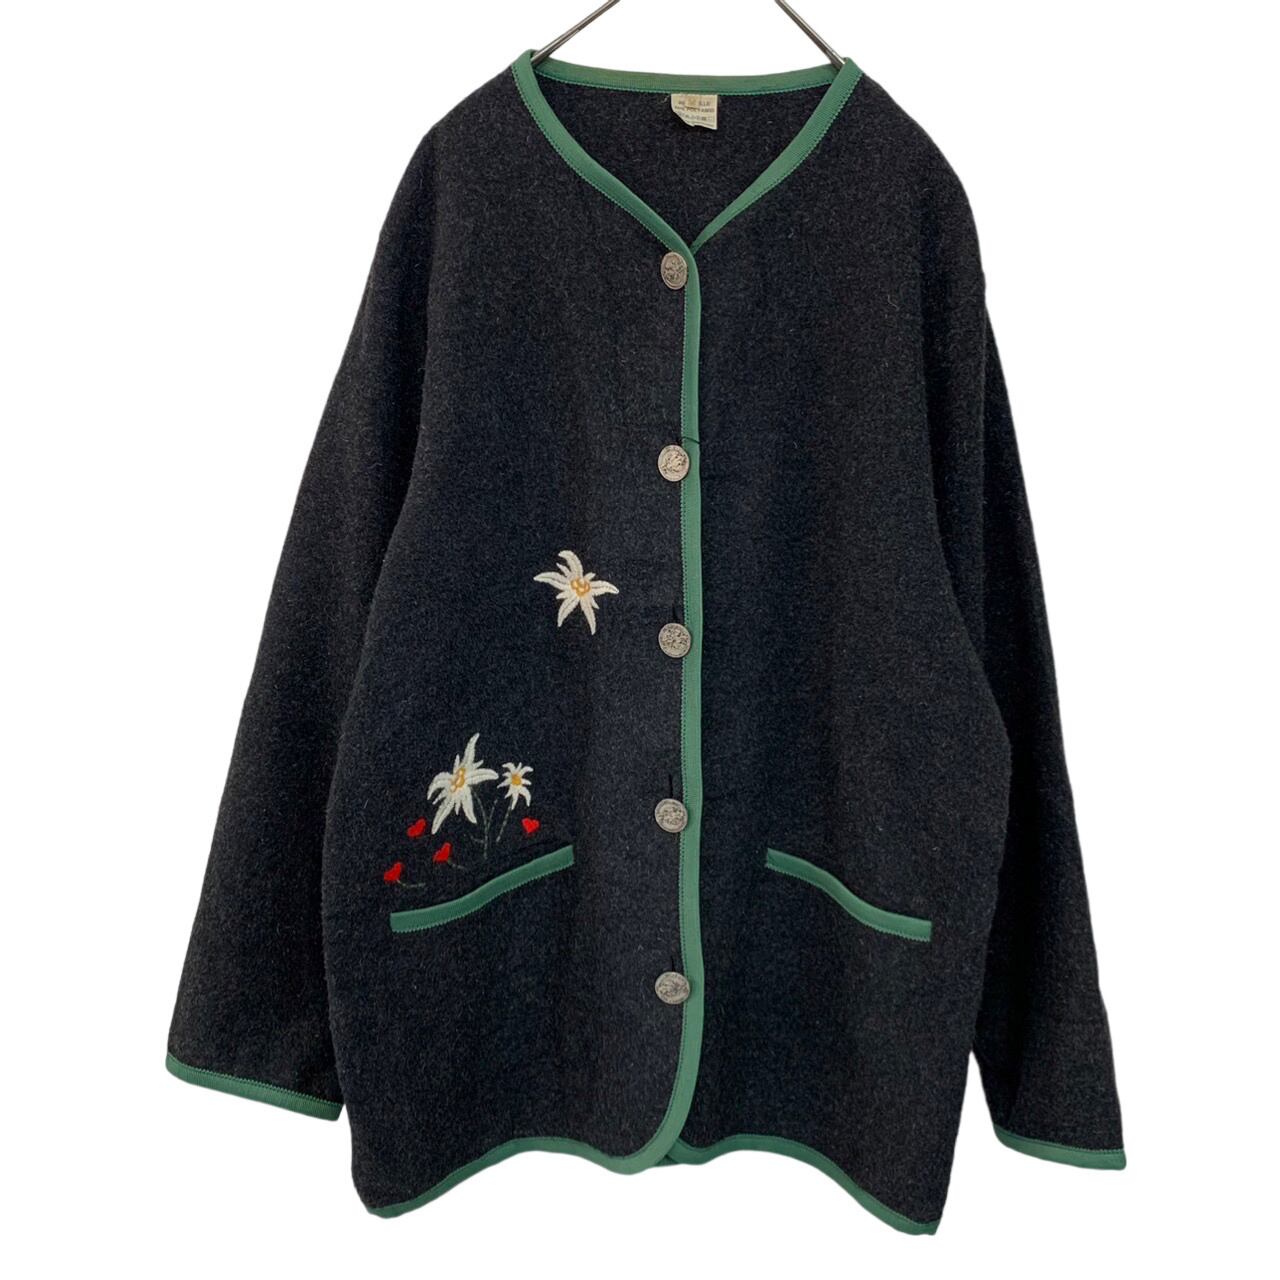 『VINTAGE wool no collar heart flower embroidery stitch medal button Tyrol  Tyrolean jacket』USED 古着 ヴィンテージ ウール ノーカラー ステッチ 刺繍 ハート フラワー 花柄 メダル ボタン チロル